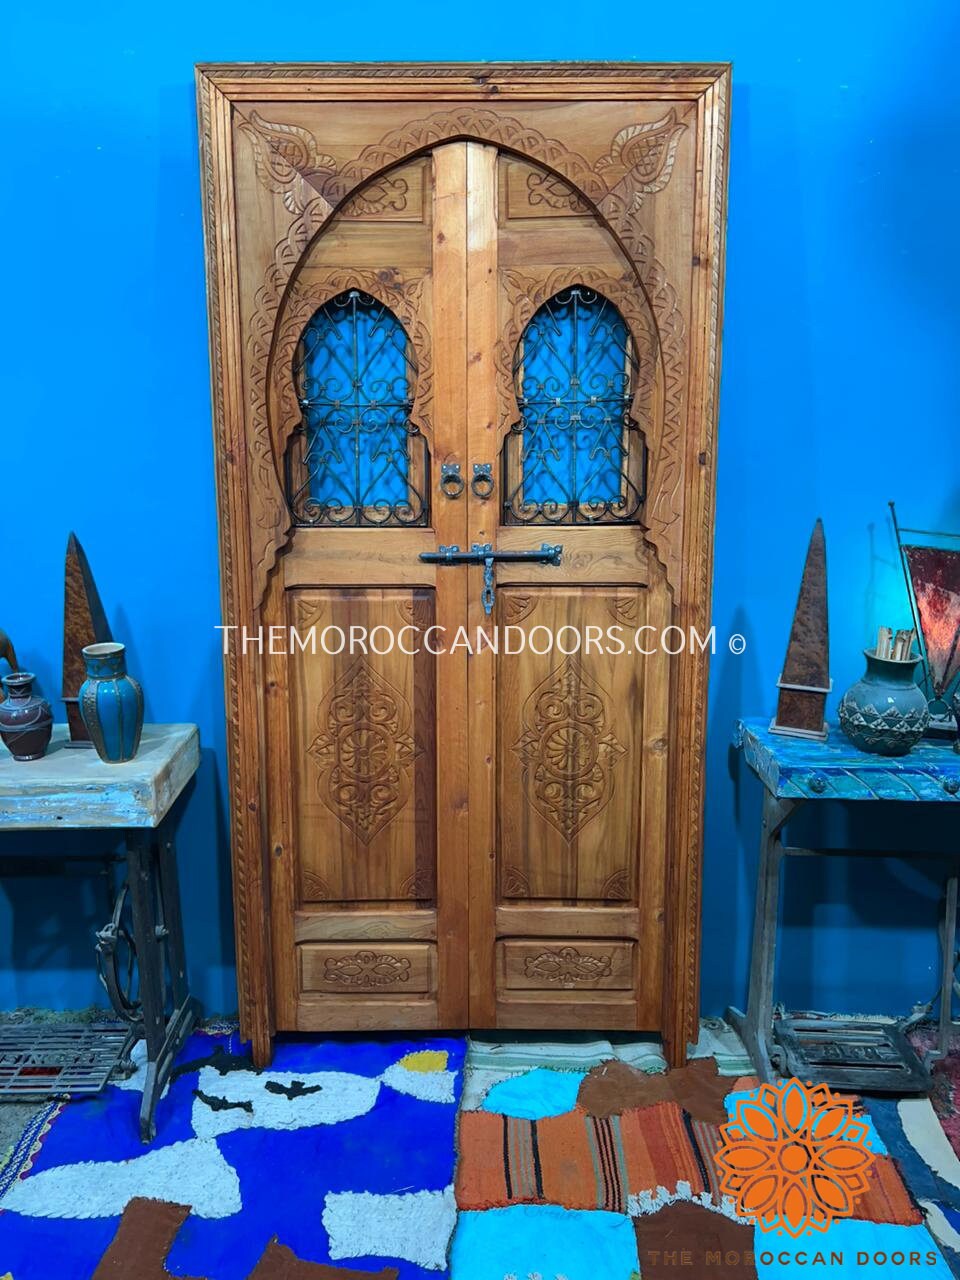 Traditional Moroccan Door Carved Wooden Door, With Two Windows In Wrought Iron Worked A Hand. Wall Decor For Your Home, Custom Wooden Doors.